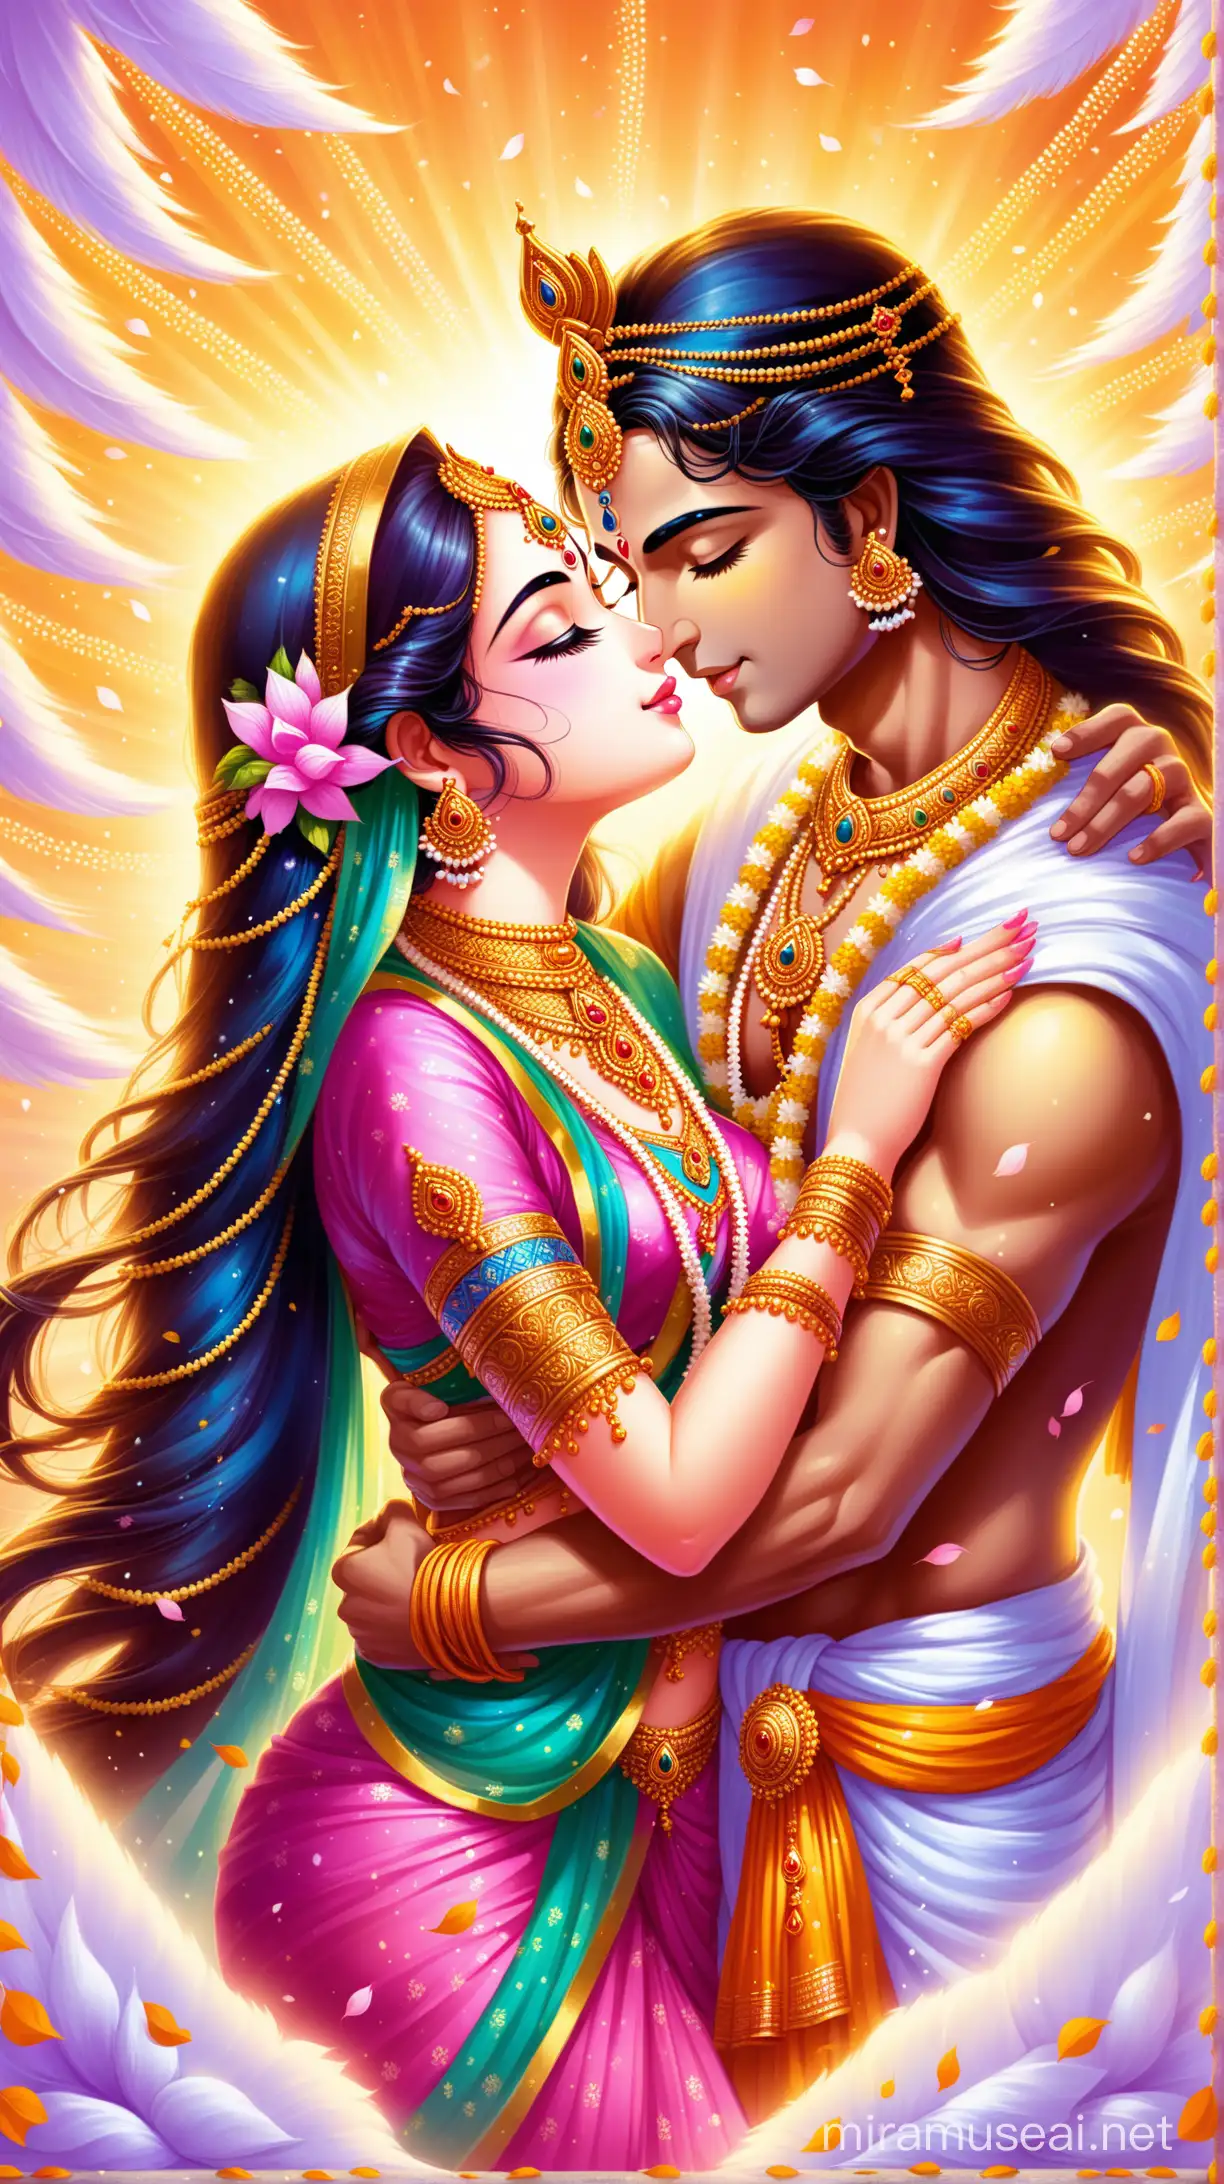 Divine Kiss of Love Radha and Krishna Embracing in Blissful Devotion